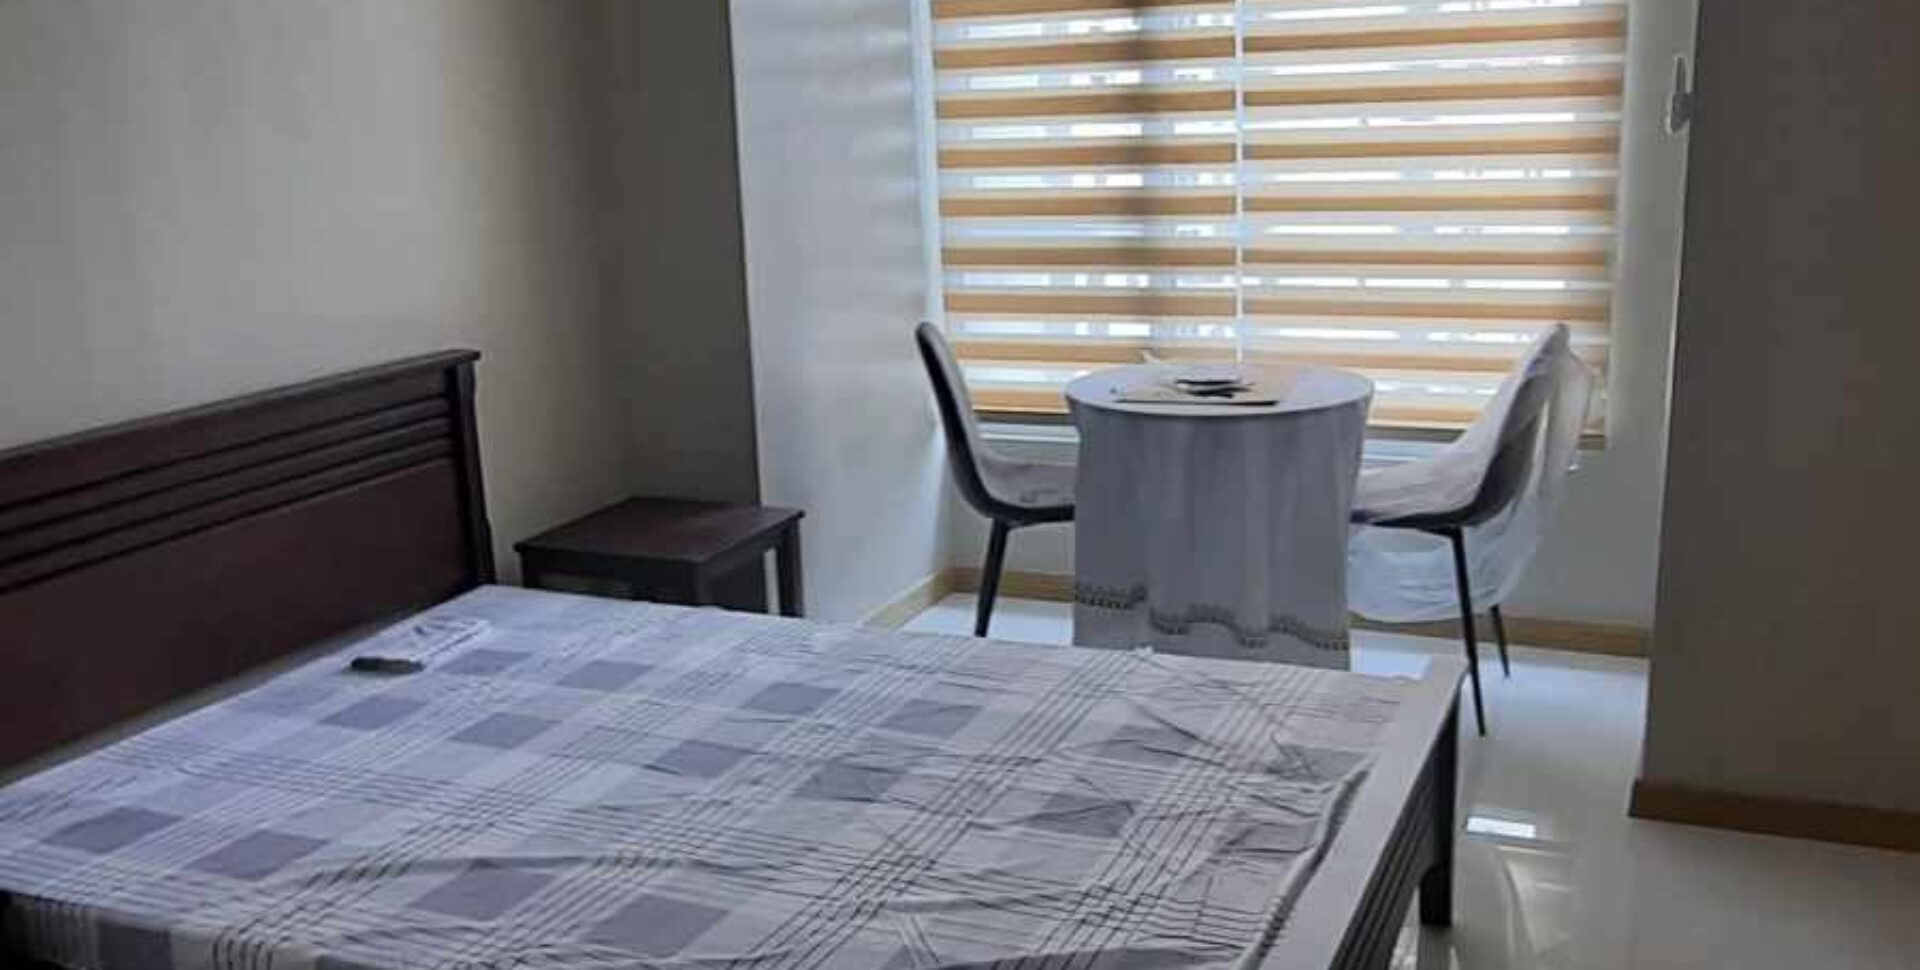 24 sq.m. Fully-furnished Studio at Sunshine 100 Tower 3, Pioneer St., Mandaluyong City